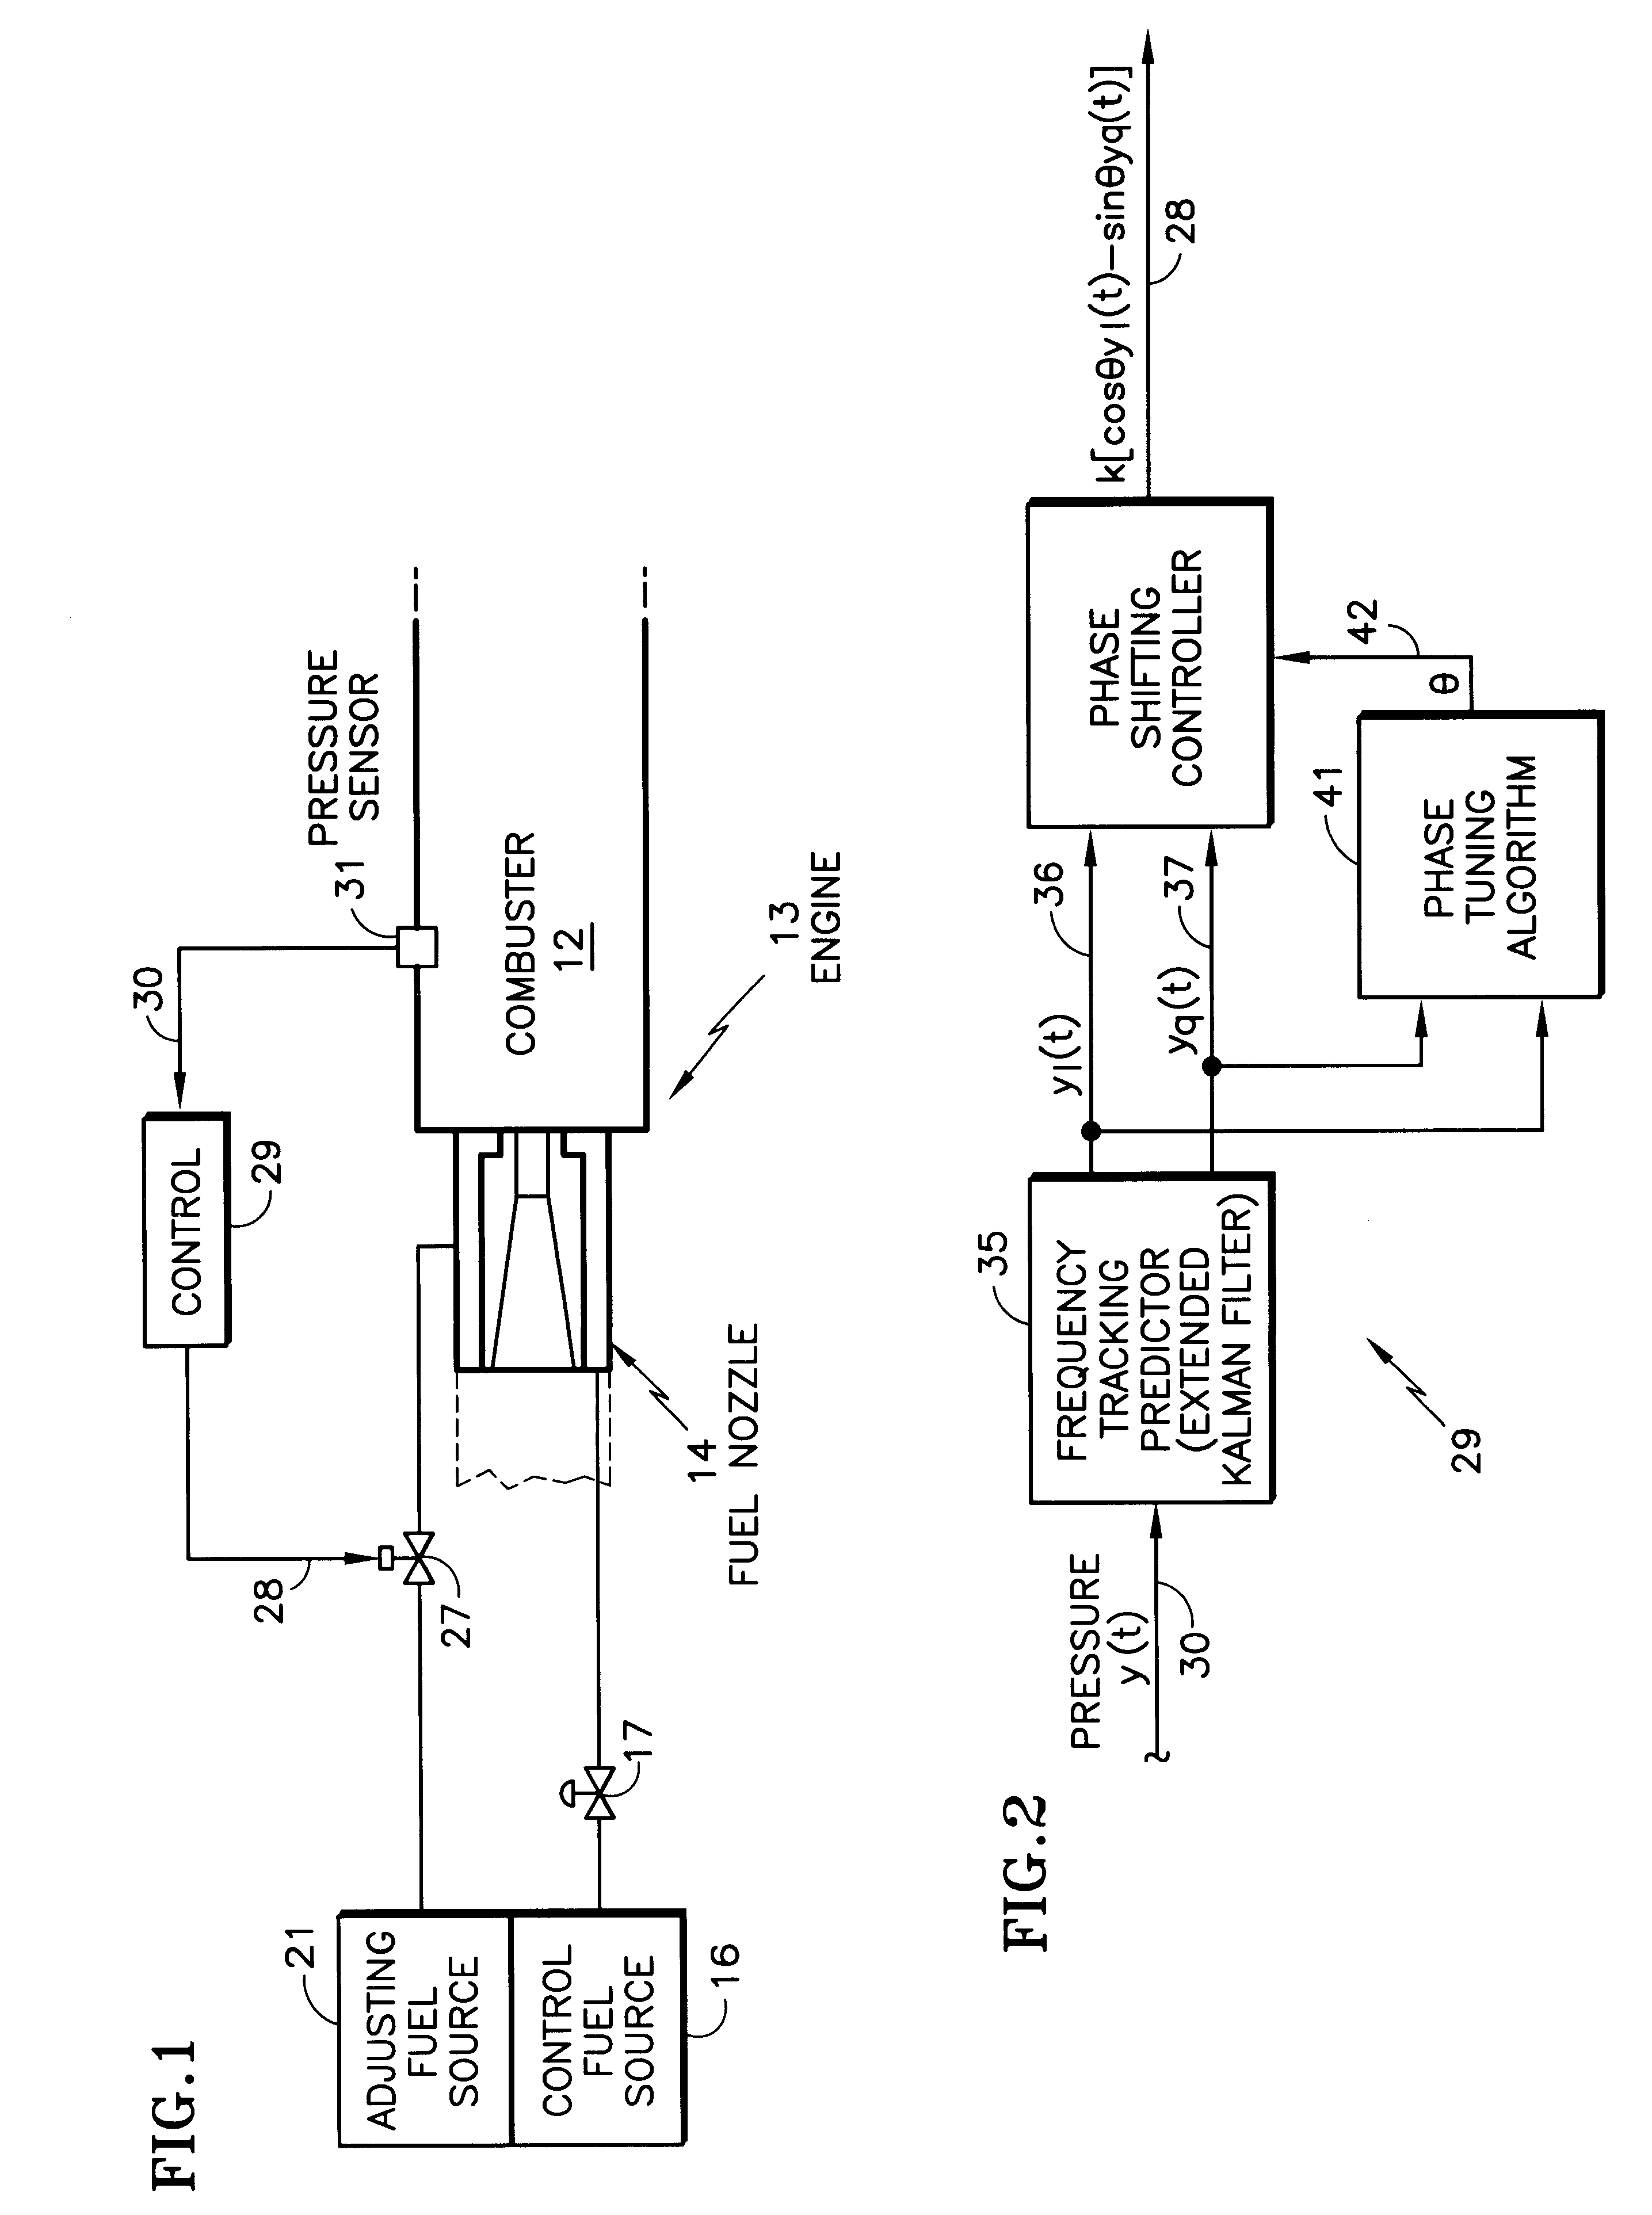 Suppressing oscillations in processes such as gas turbine combustion